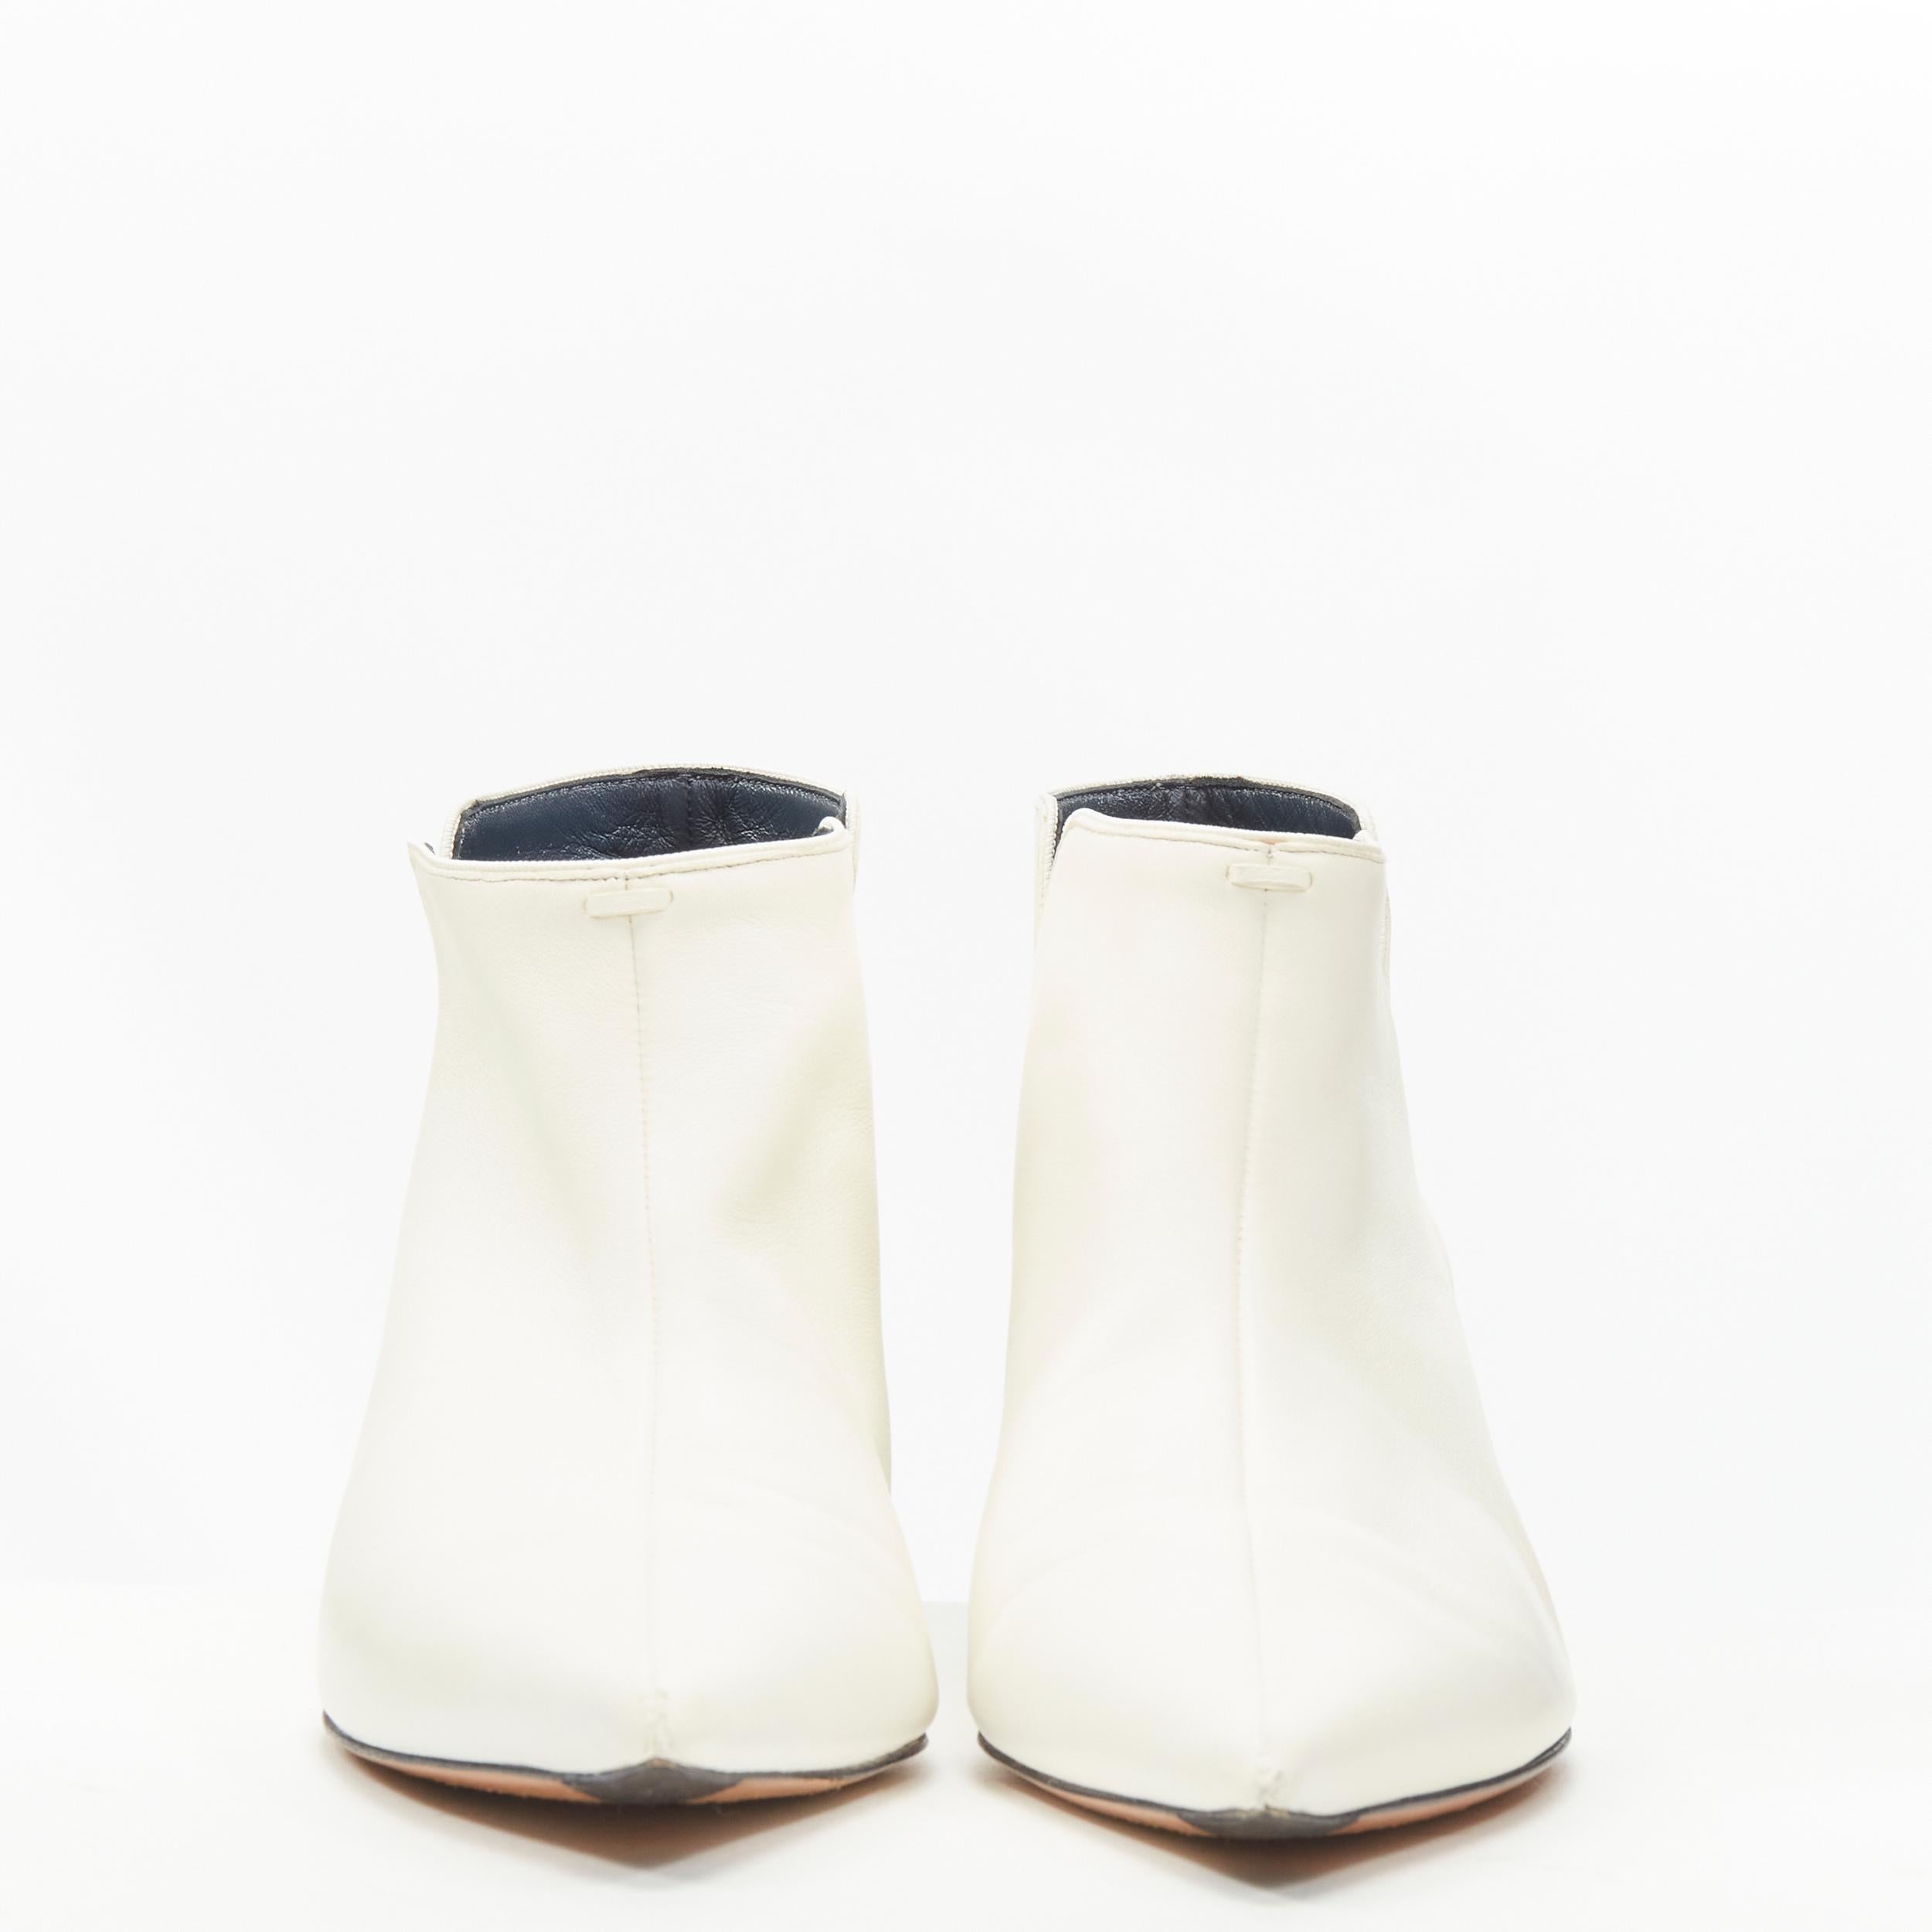 White OLD CELINE Phoebe Philo white soft leather suede cone heel ankle bootie EU38